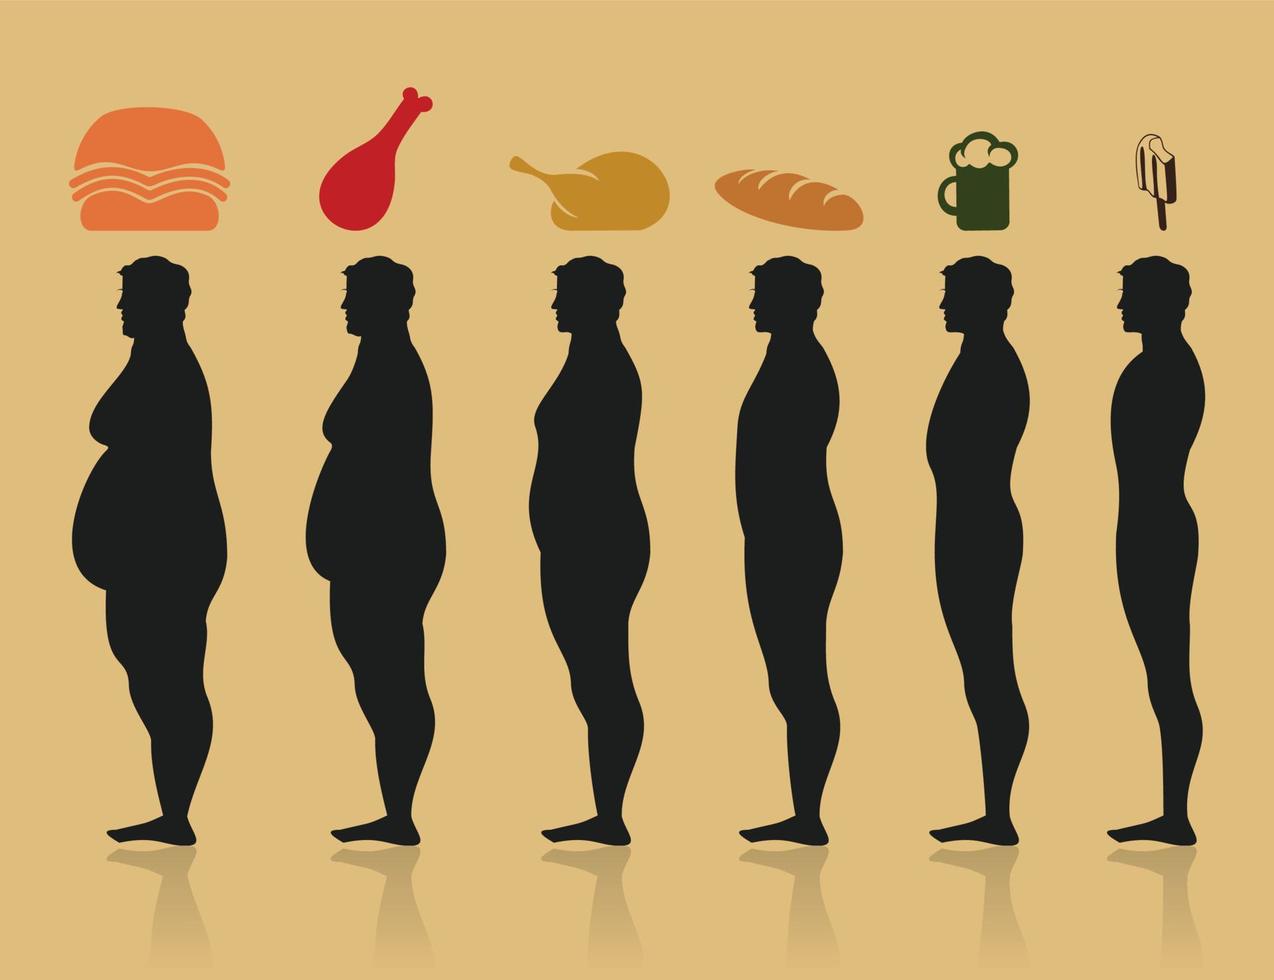 Harmful products of food round the fat man. A vector illustration